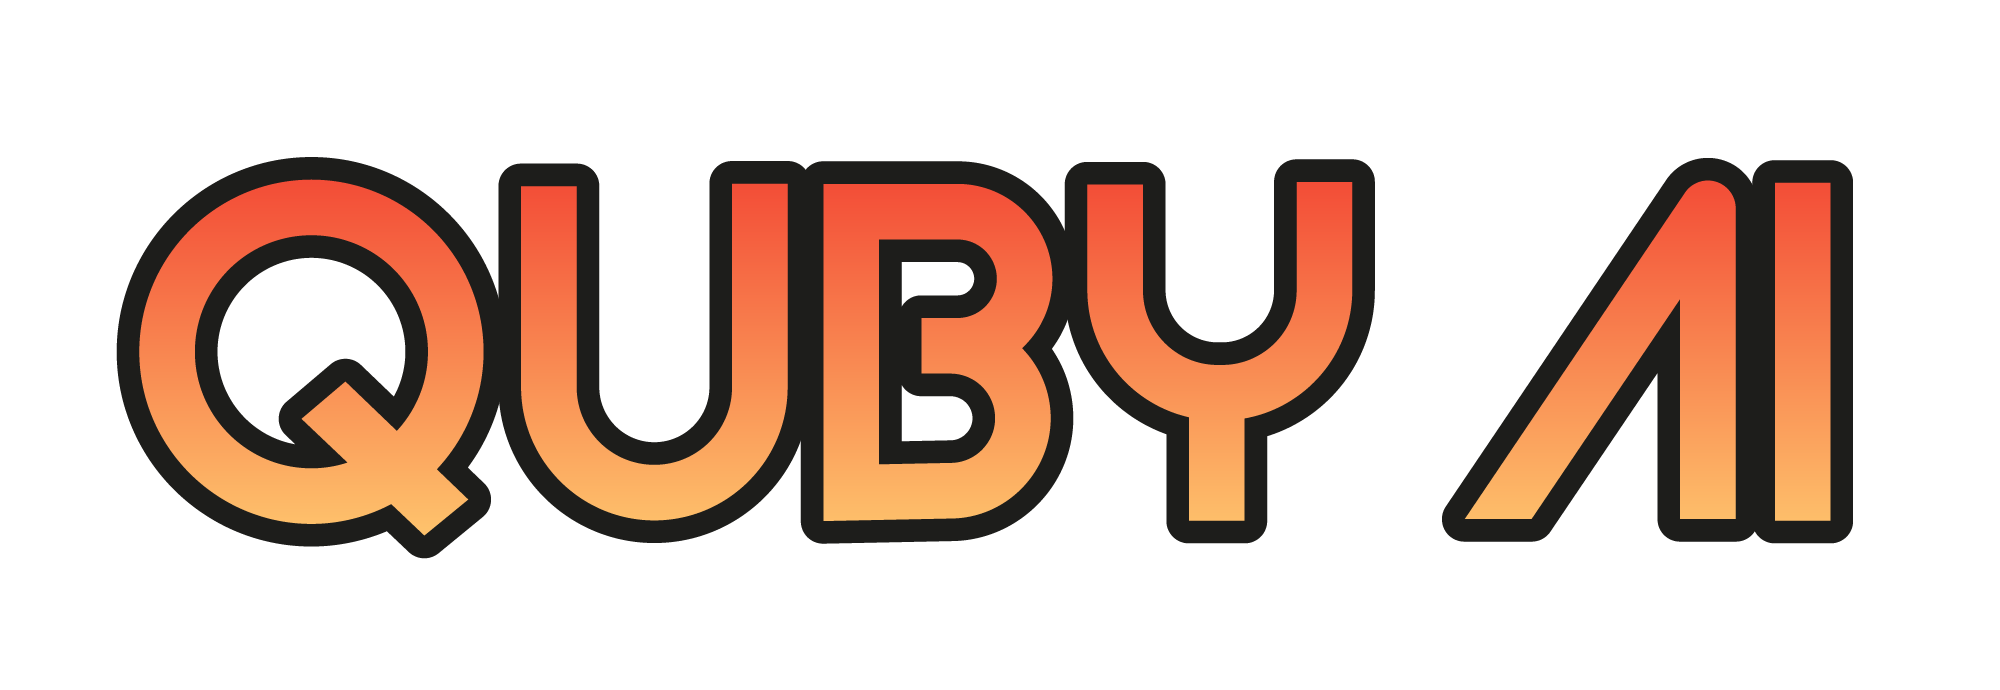 QuBy Ai's Game-Changer: Web 3.0 Gaming and QubyChain Blockchain Set to Redefine Online Gaming and Revenue Sharing